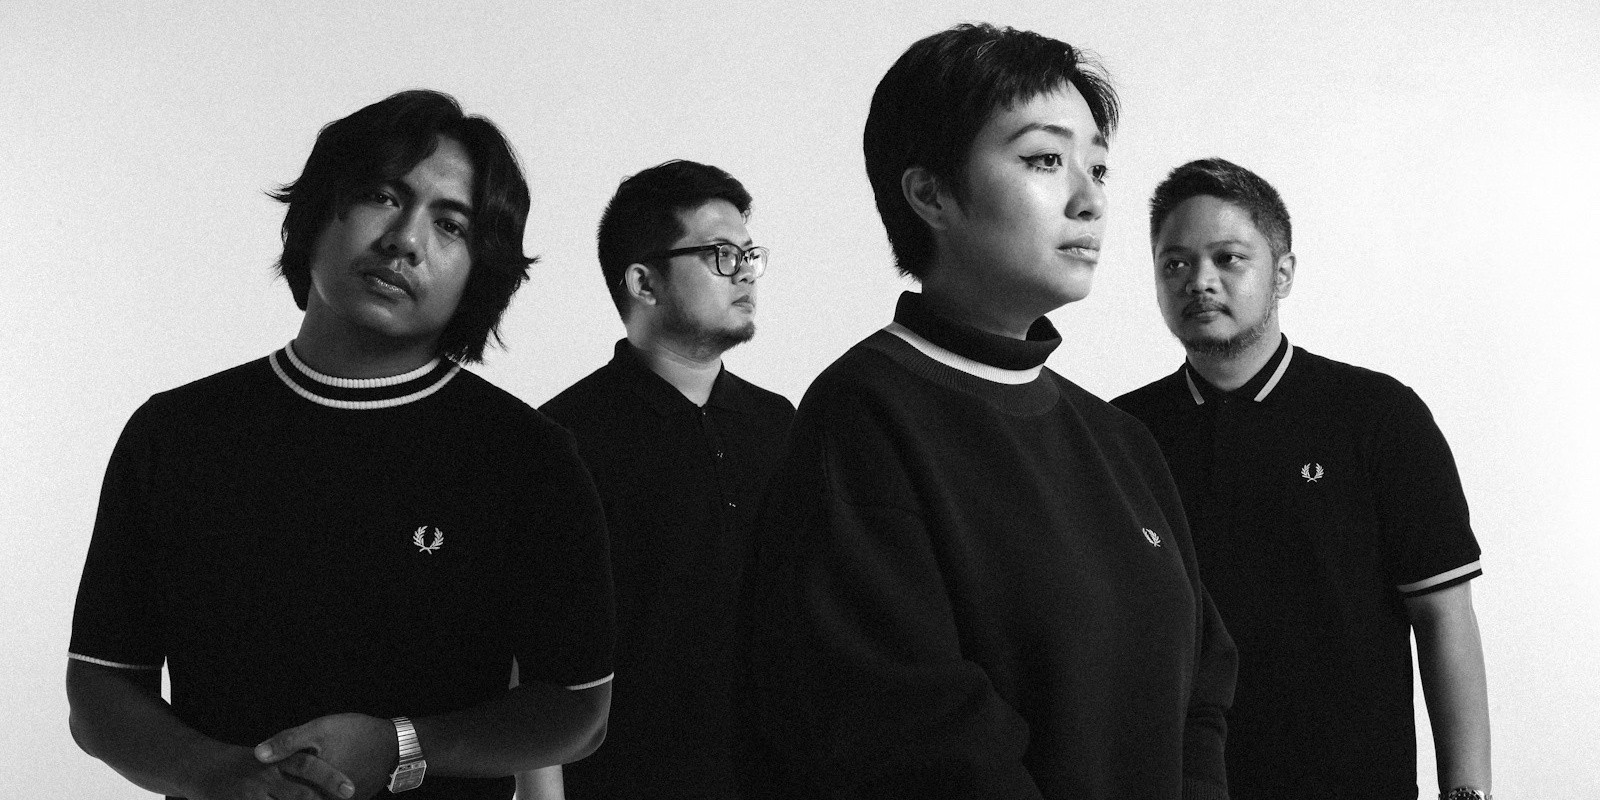 UDD surprise fans with release of new self-titled album – listen